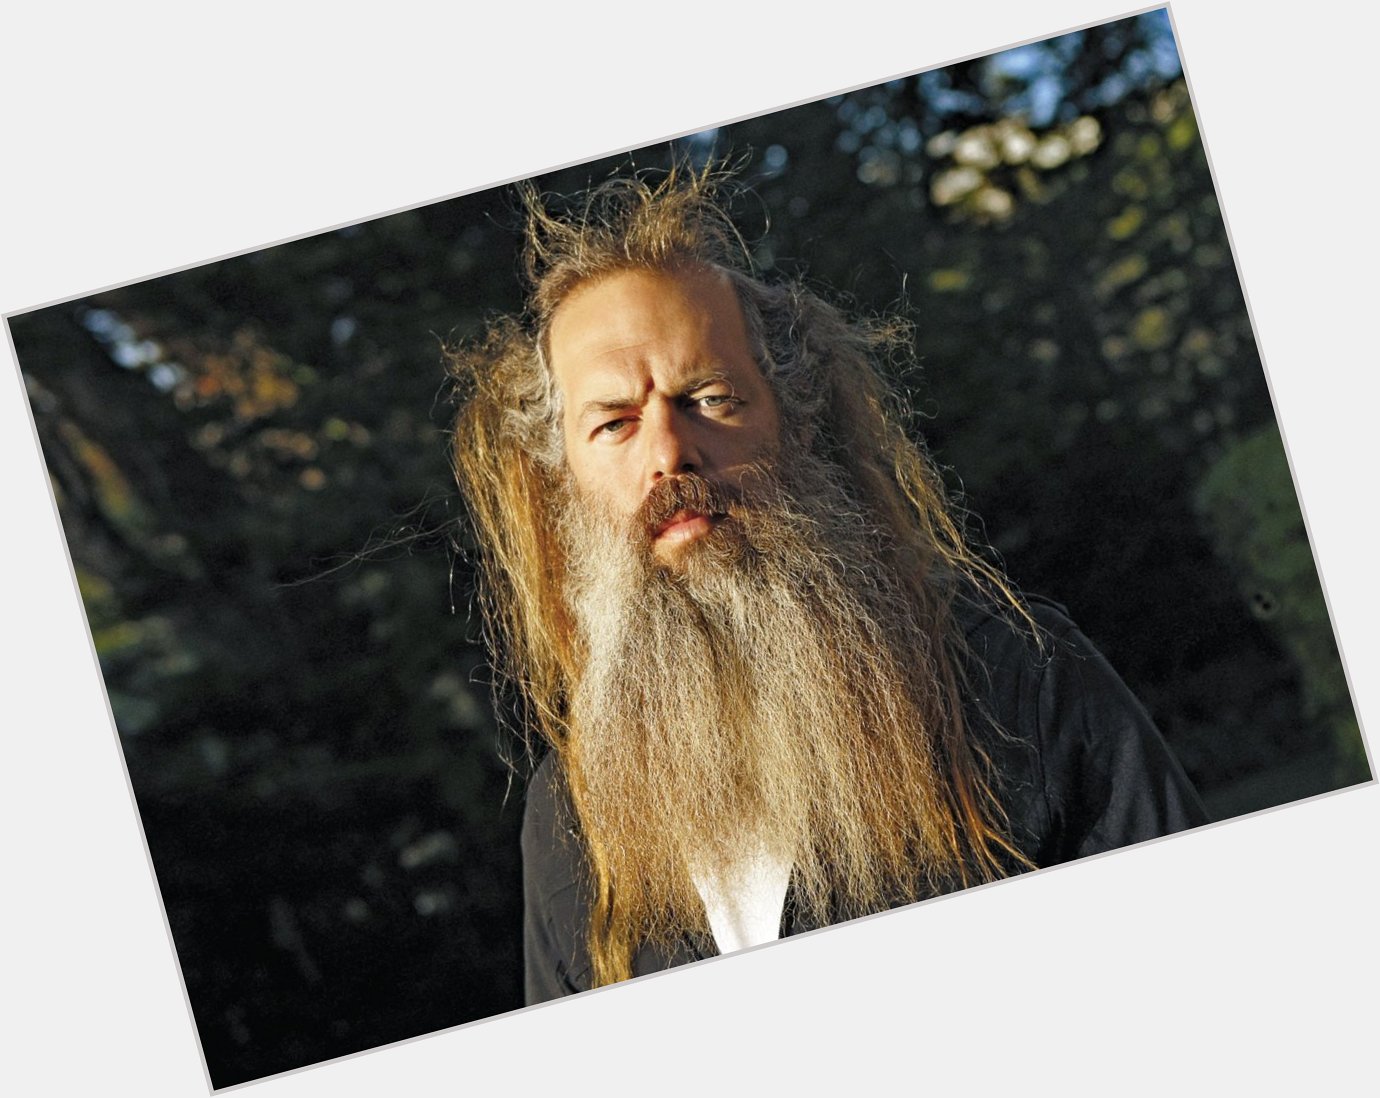 Please join me here at in wishing the one and only Rick Rubin a very Happy 58th Birthday today  